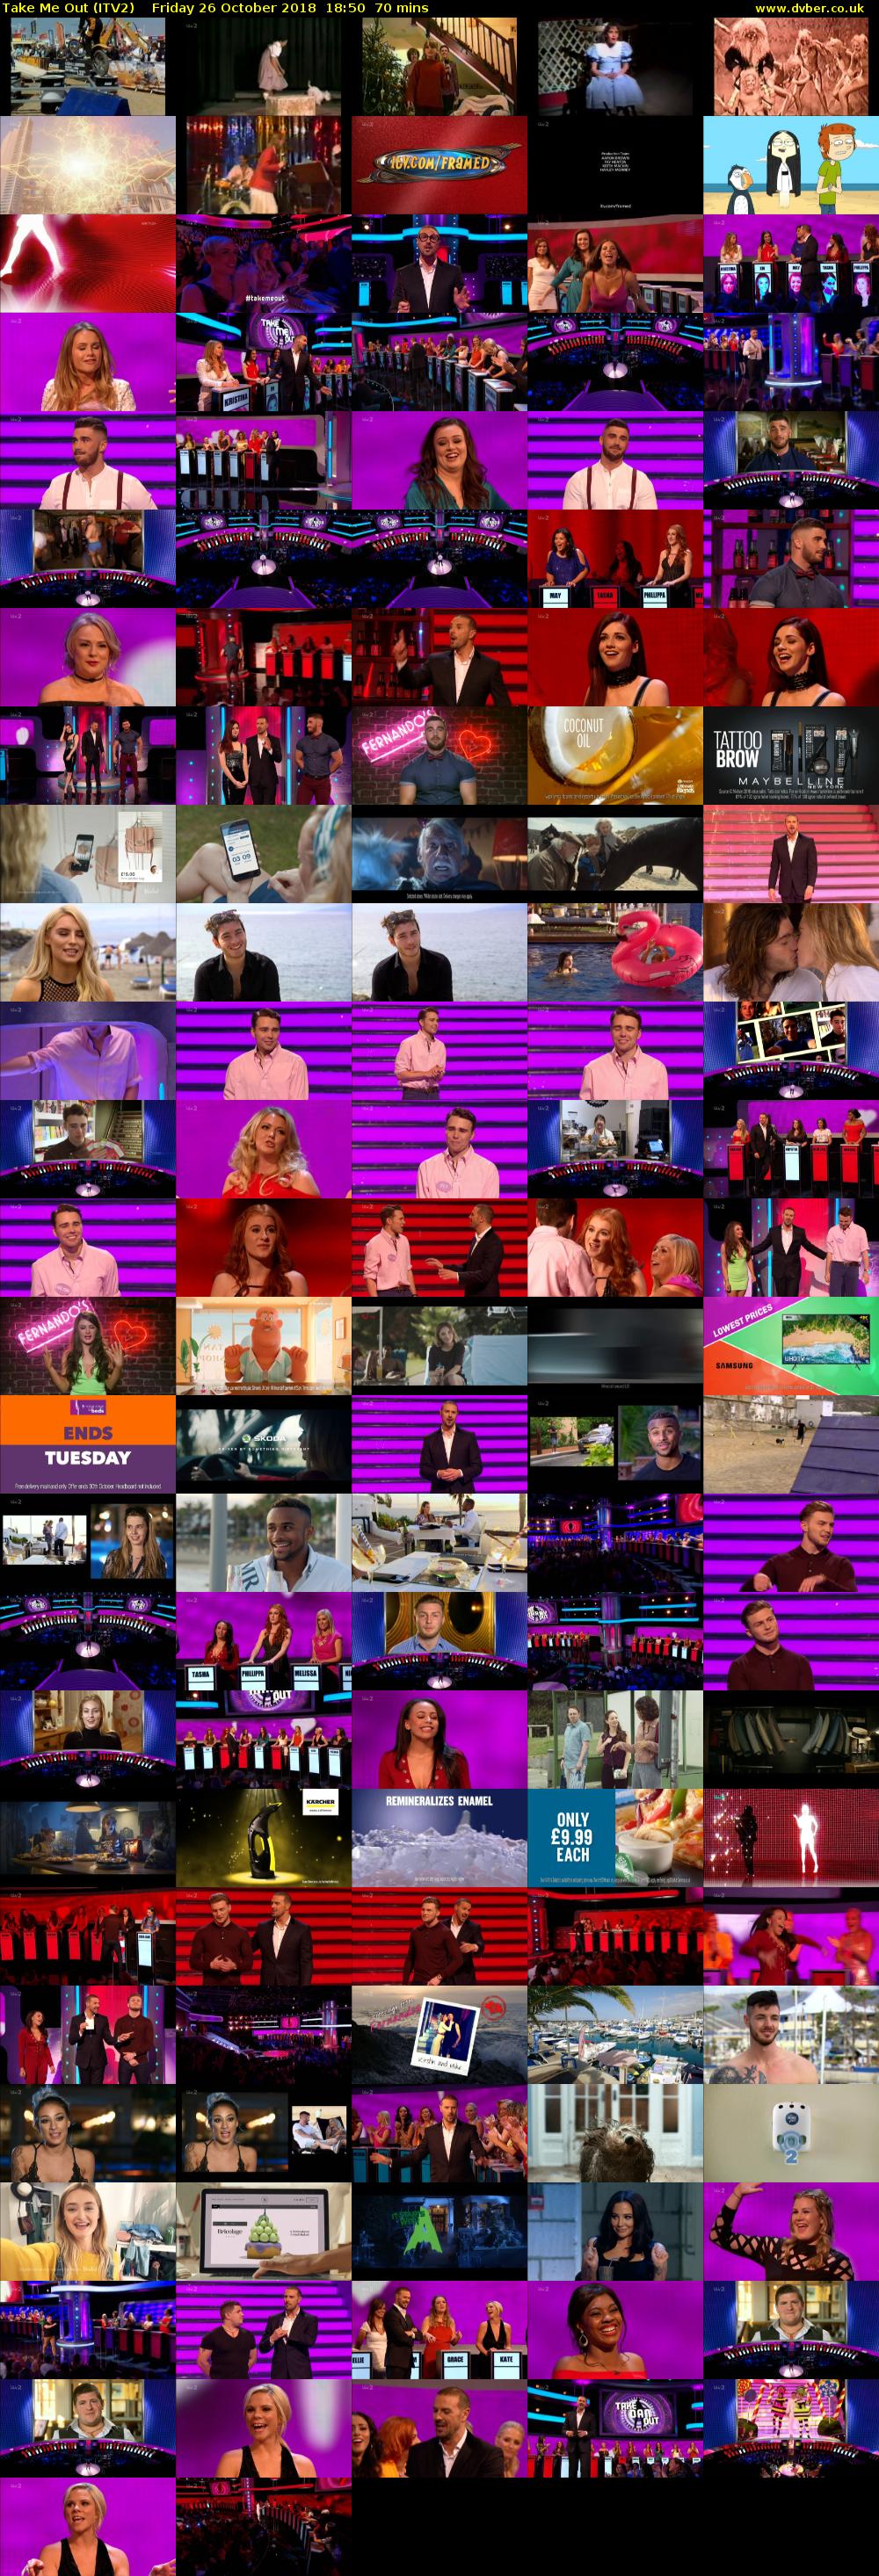 Take Me Out (ITV2) Friday 26 October 2018 18:50 - 20:00